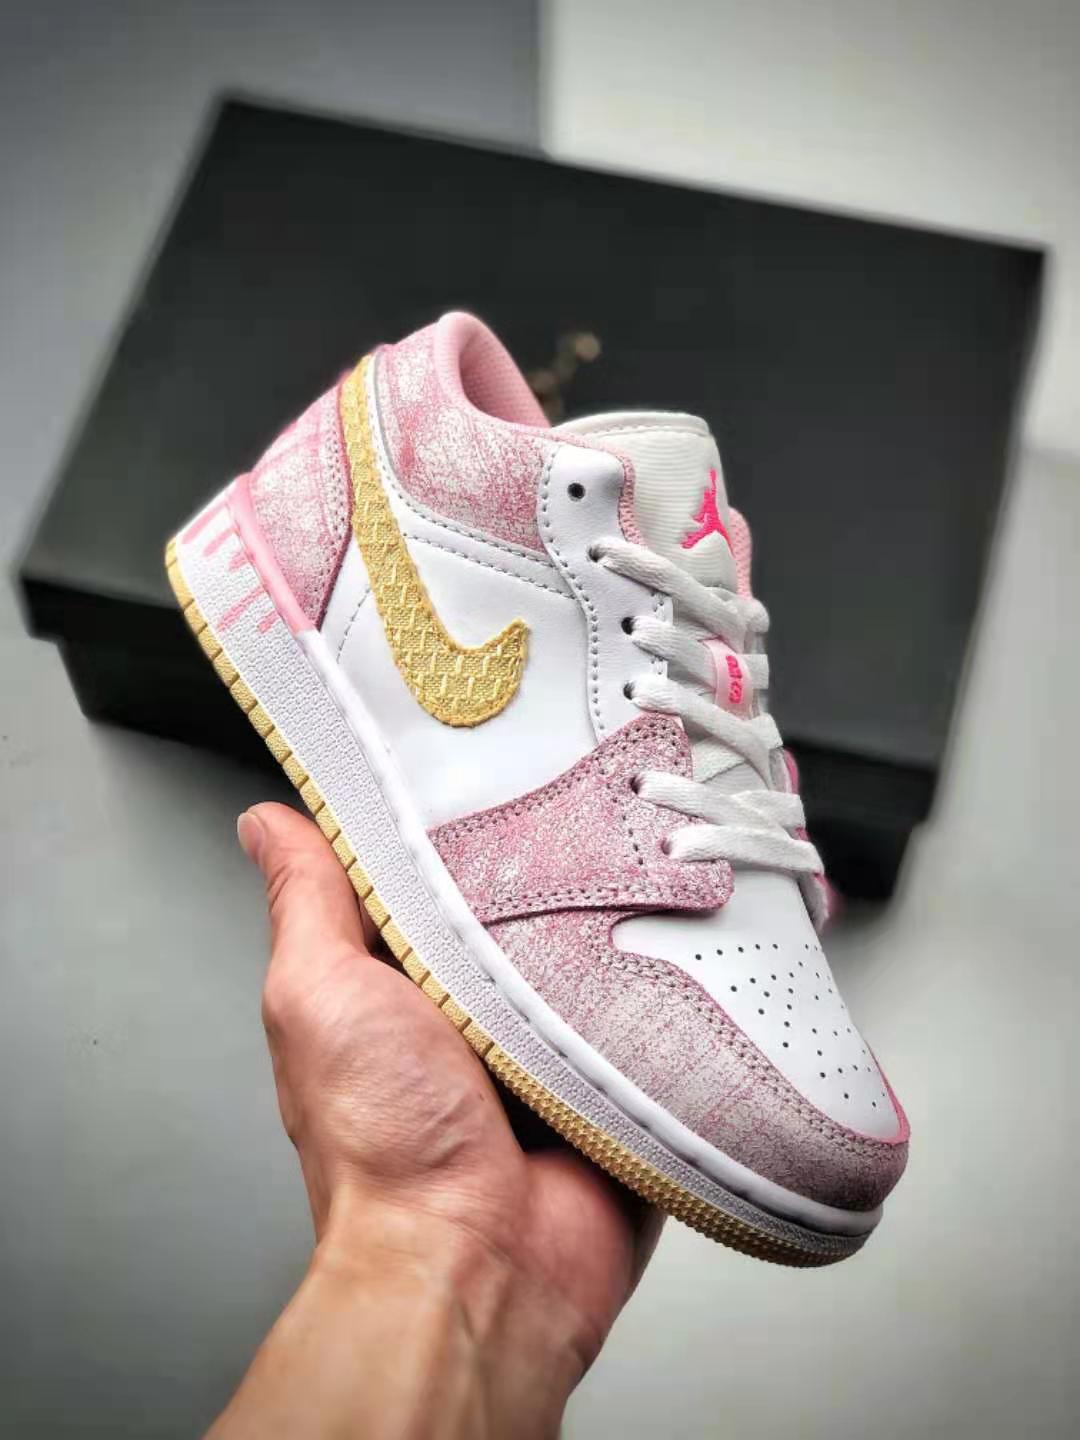 Air Jordan 1 Low 'Strawberry Ice Cream' CW7104-601 - Sweet and Stylish Sneakers